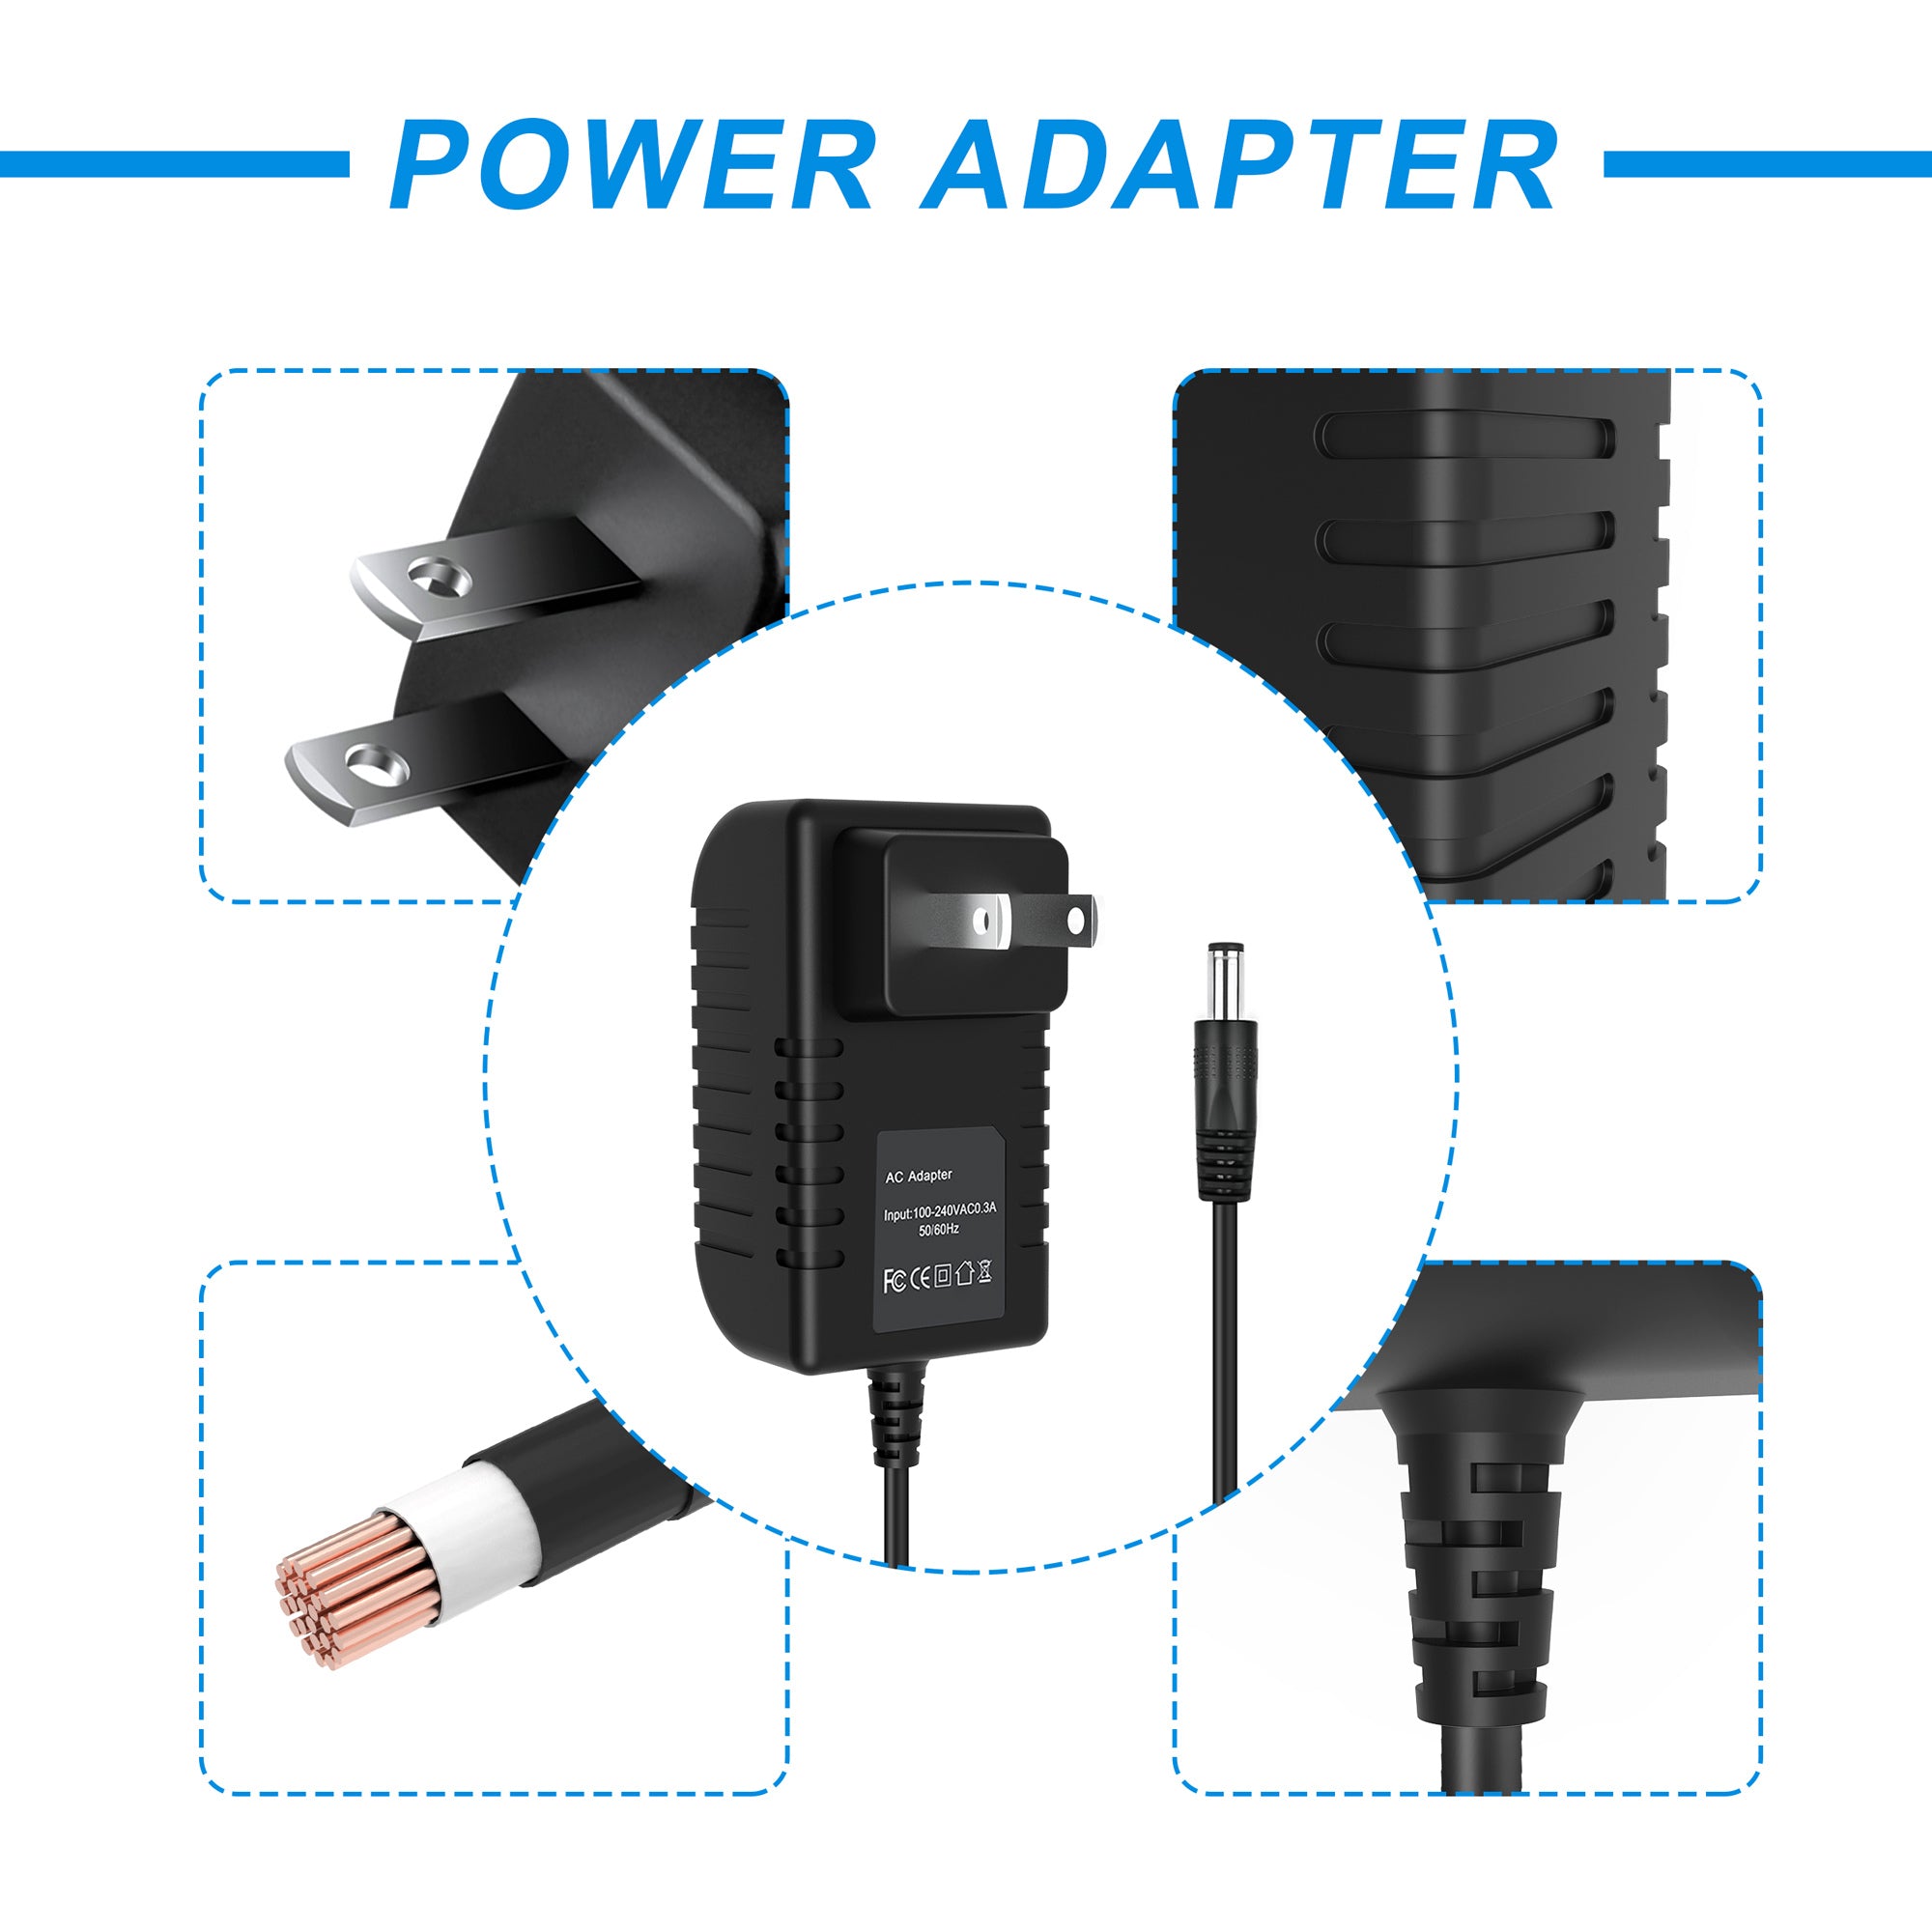 AbleGrid AC/DC Adapter Compatible with Minolta Dimage 5, Minolta Dimage 7, Minolta Dimage S304, Minolta Dimage EX1500 Digital Camera Power Supply Cord Cable PS Wall Home Charger Mains PSU